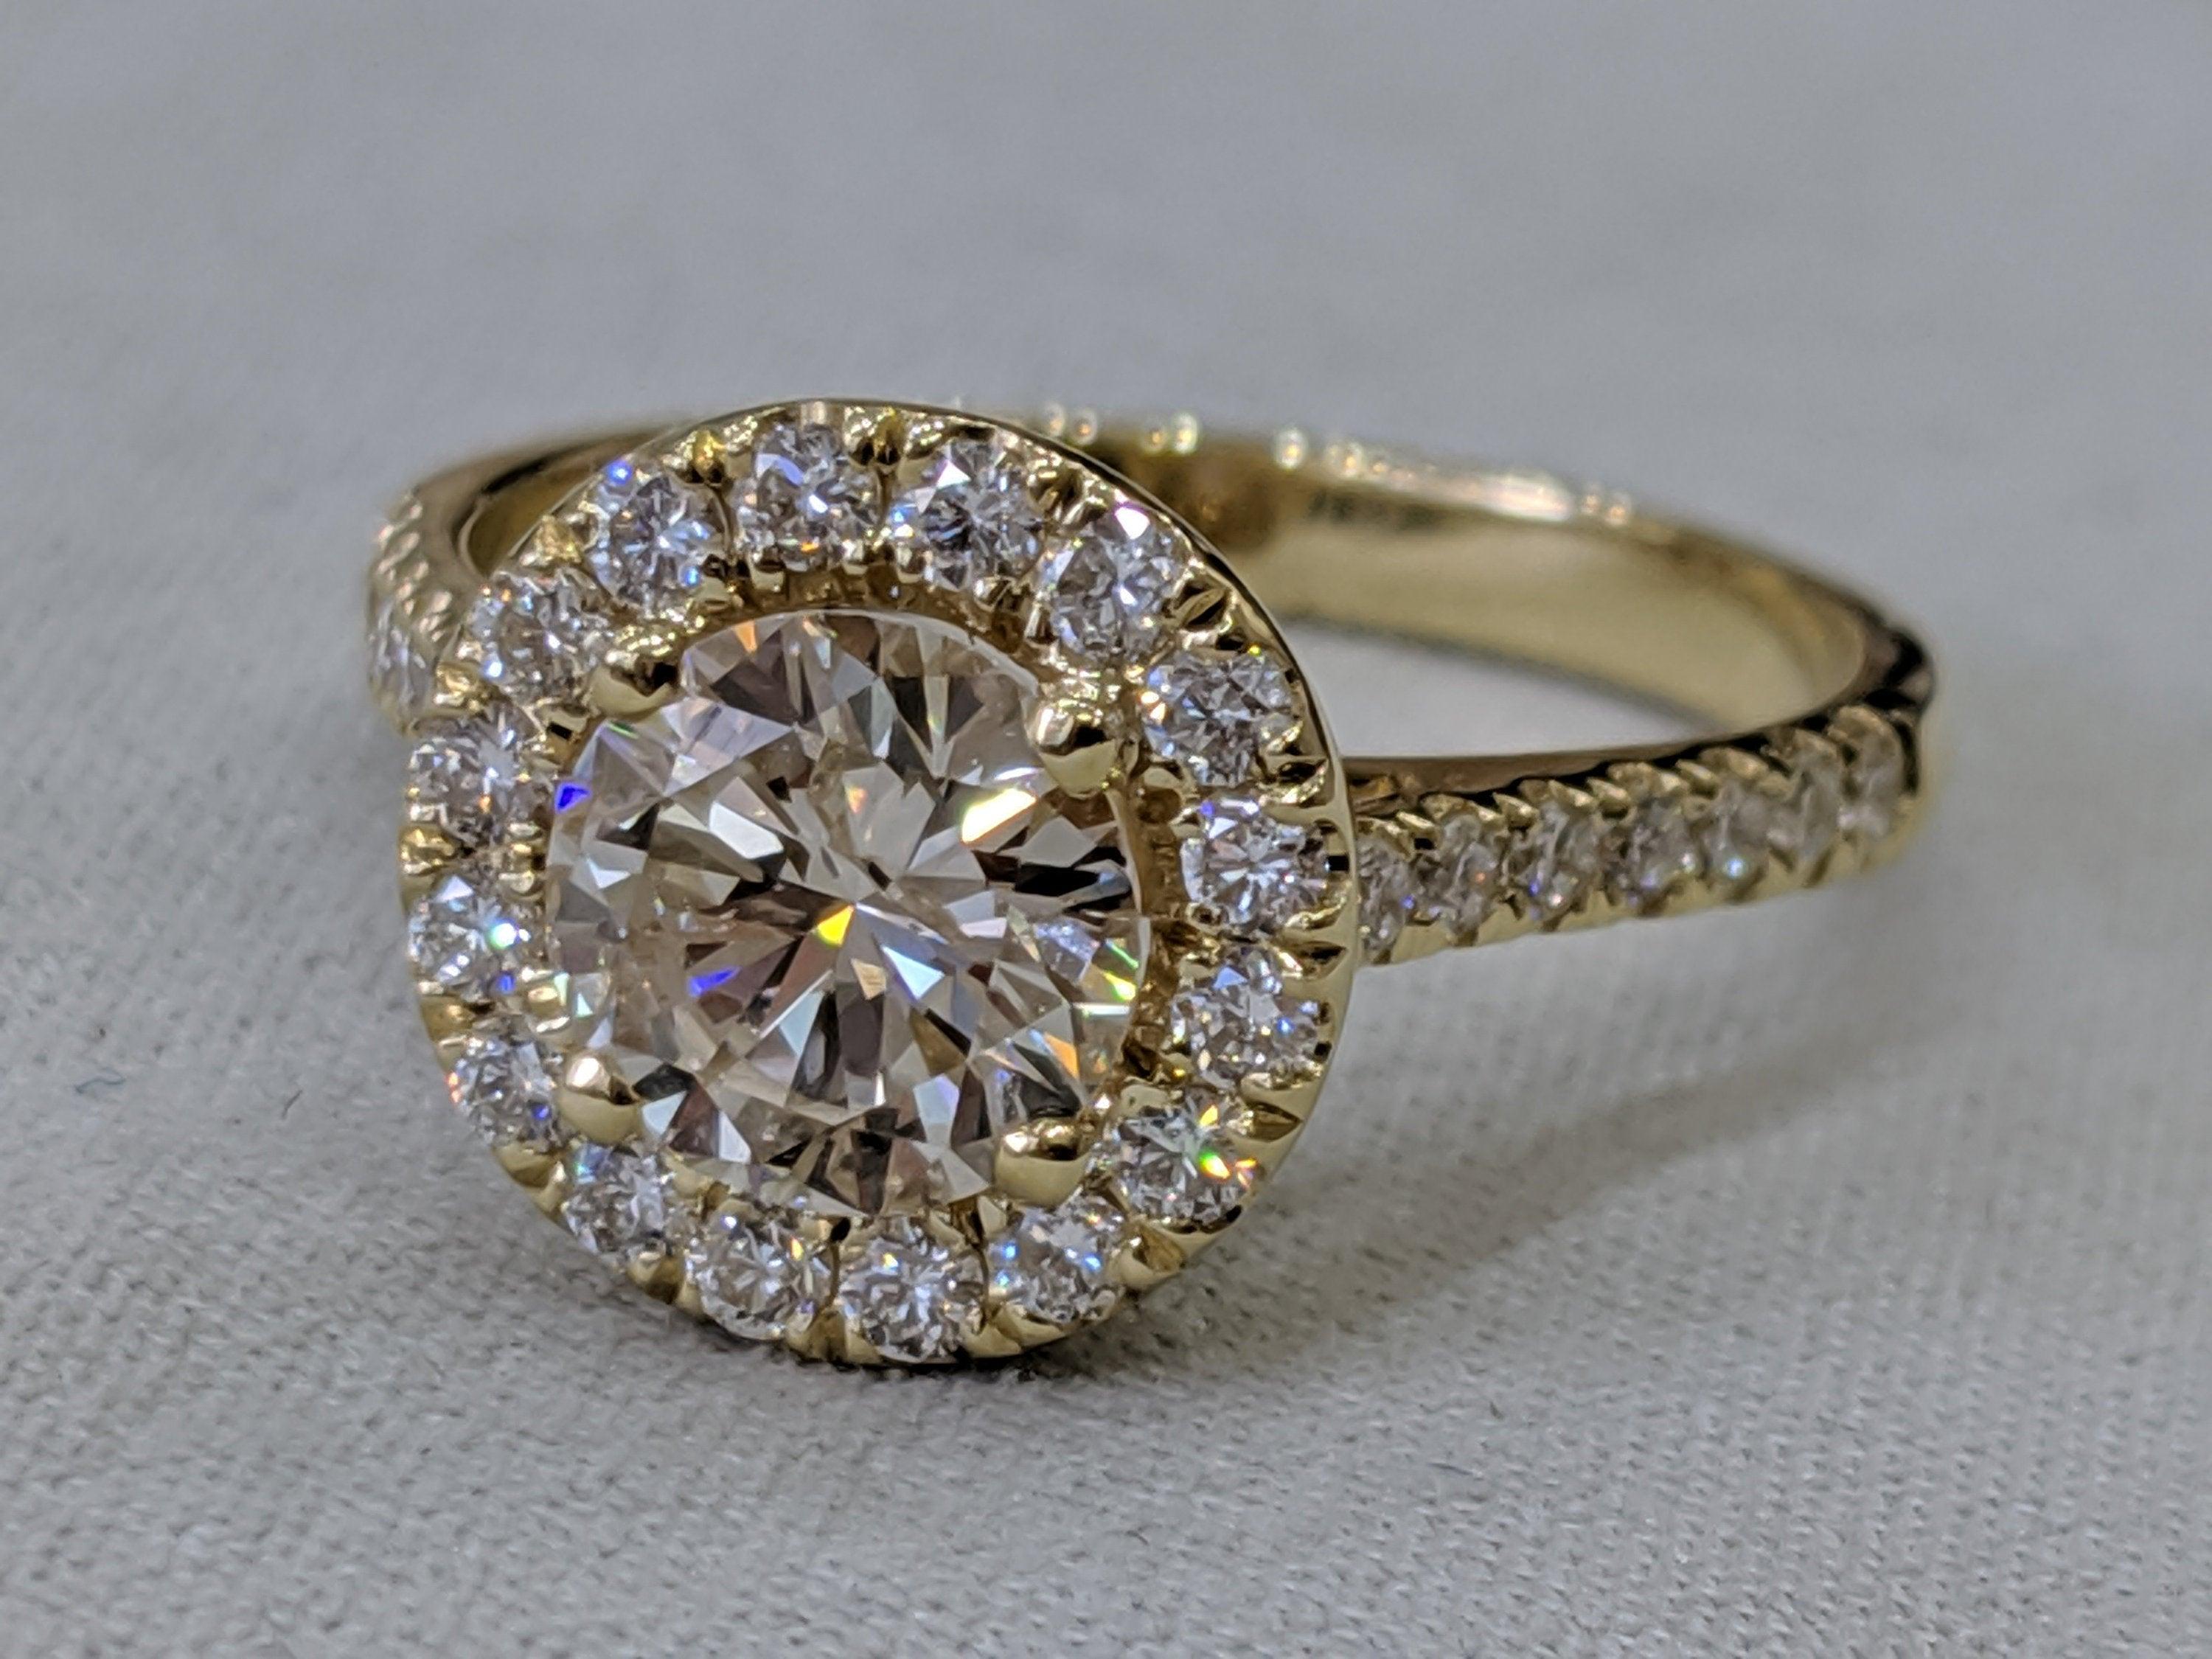 1 3/4 Carat Diamond Halo Engagement Ring , 1.80ct Yellow Gold Diamond Halo Ring , Solitaire With Accents Engagement Ring, Promise Ring 
 
 Main Stone Name: Natural Earth Mined Diamond
 Main Stone Weight: 1.10 ct.
 Main Stone Clarity: SI2
 Main Stone